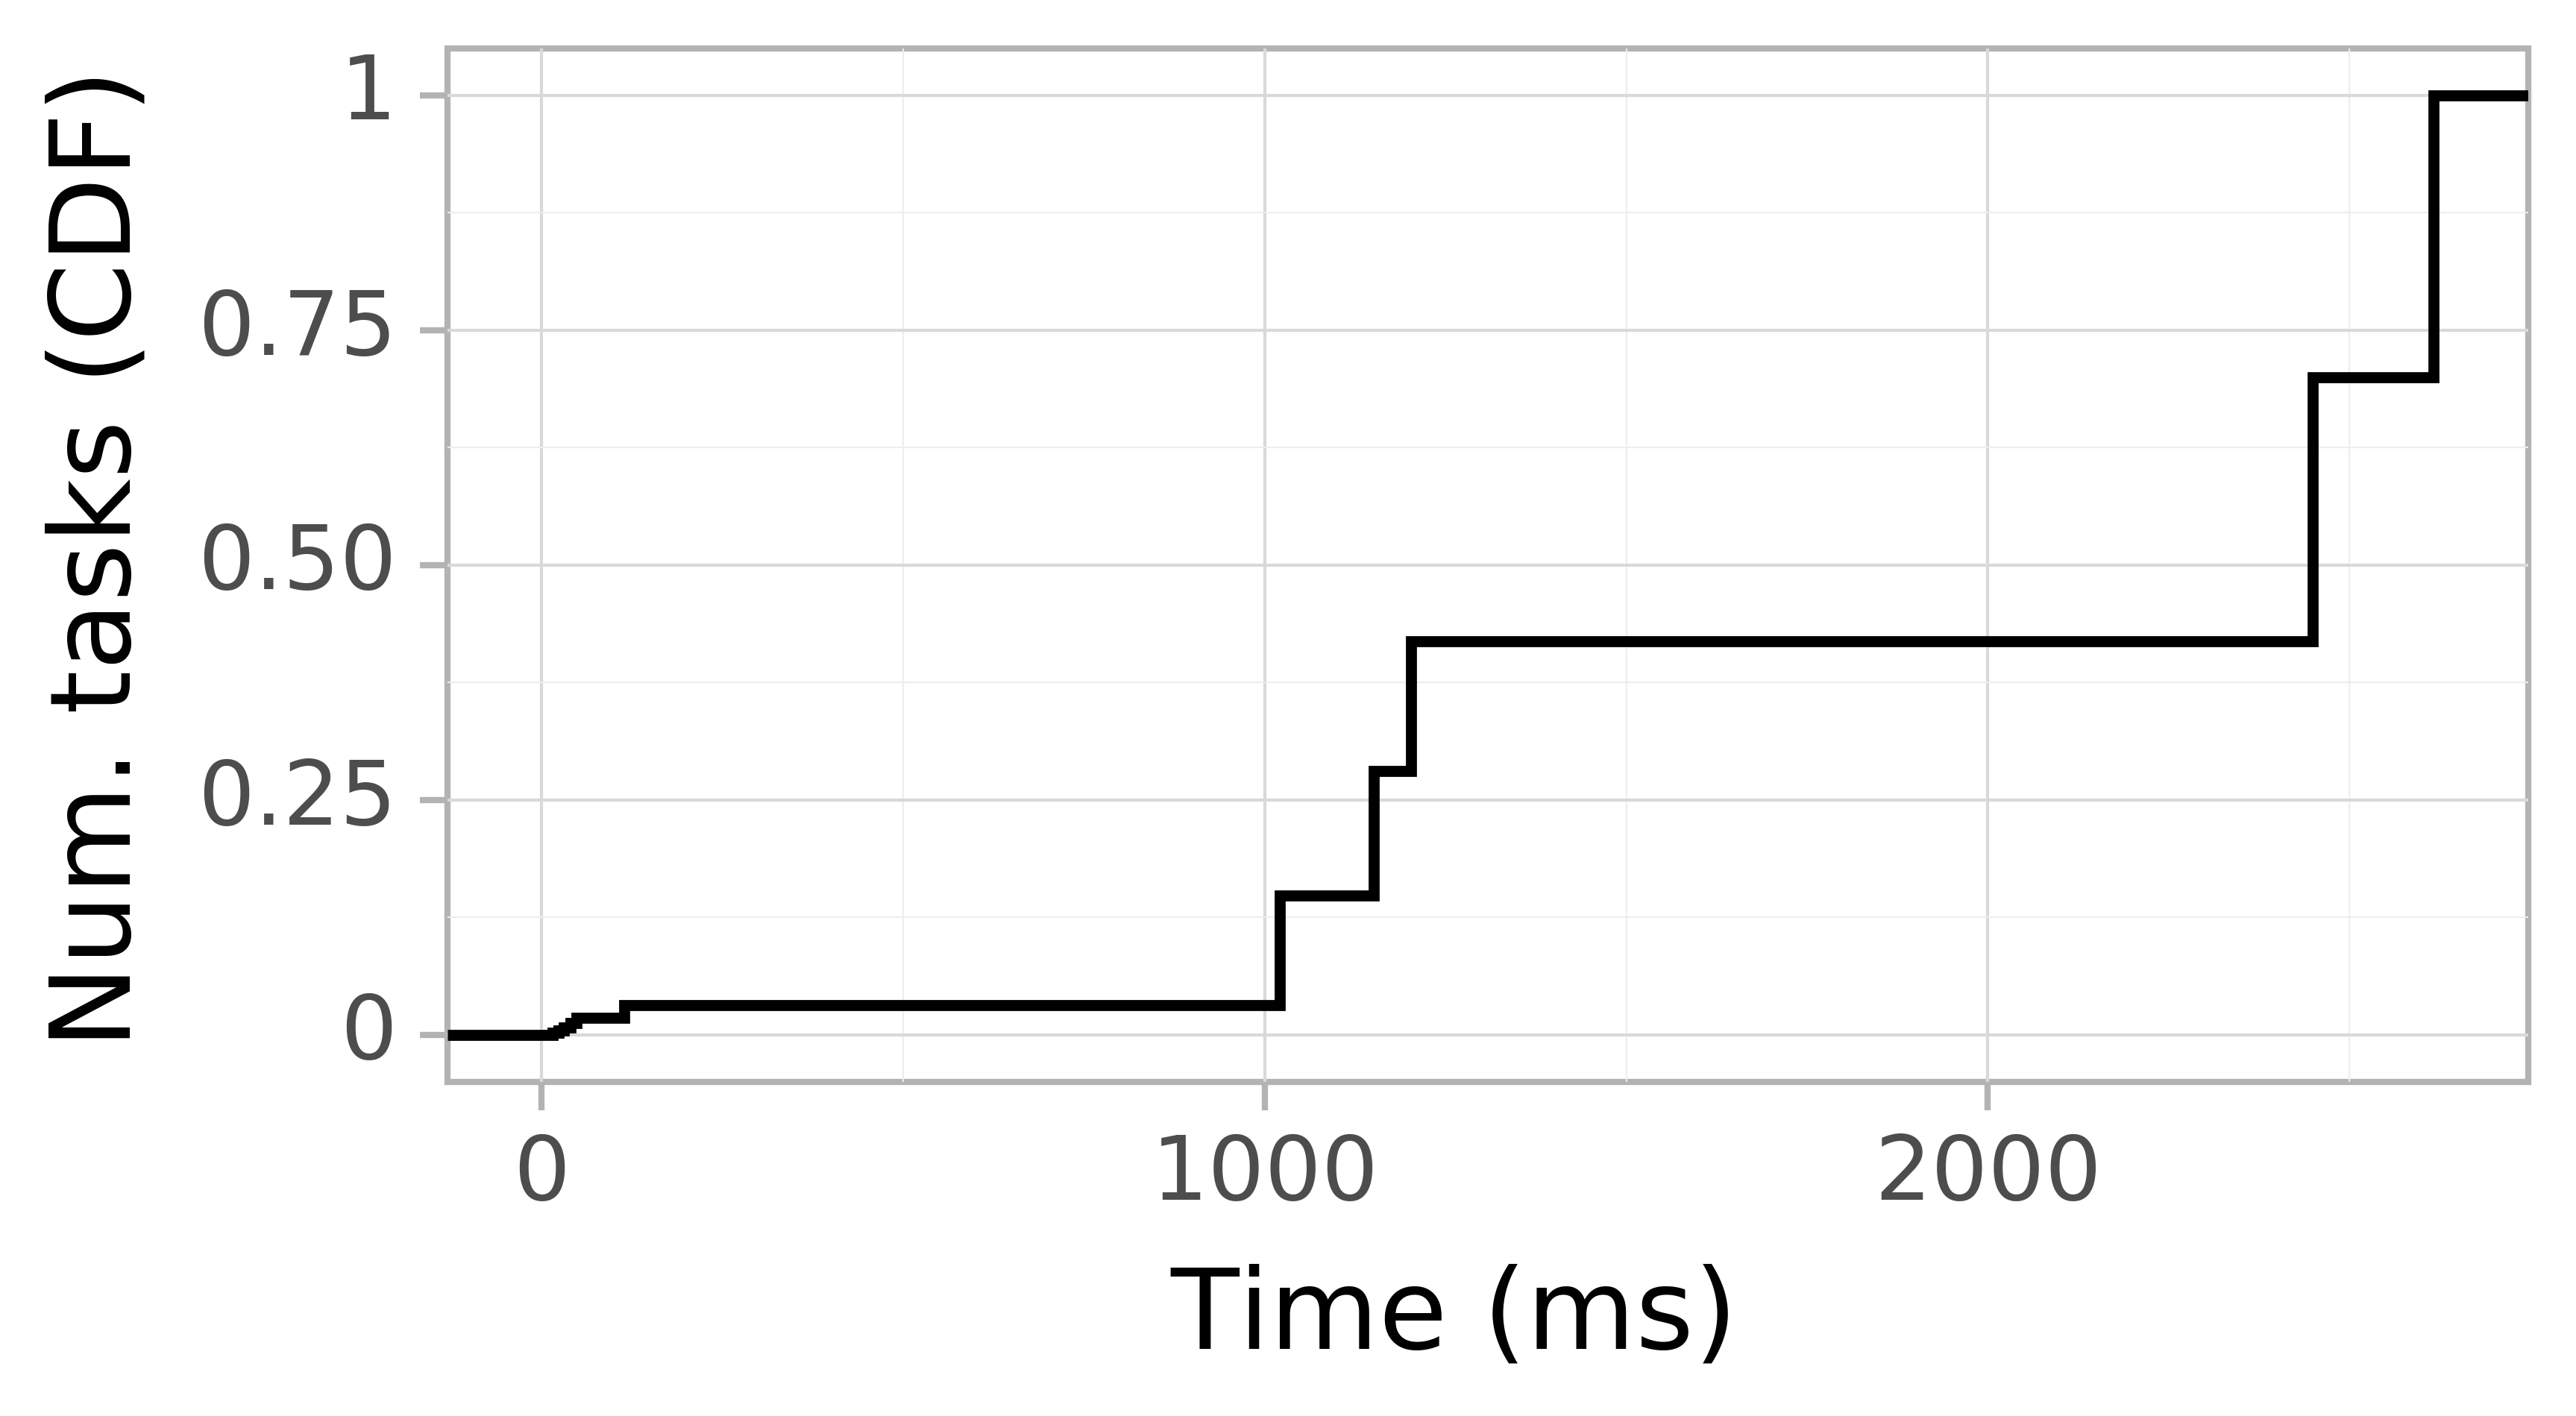 Task arrival CDF graph for the Pegasus_P4 trace.